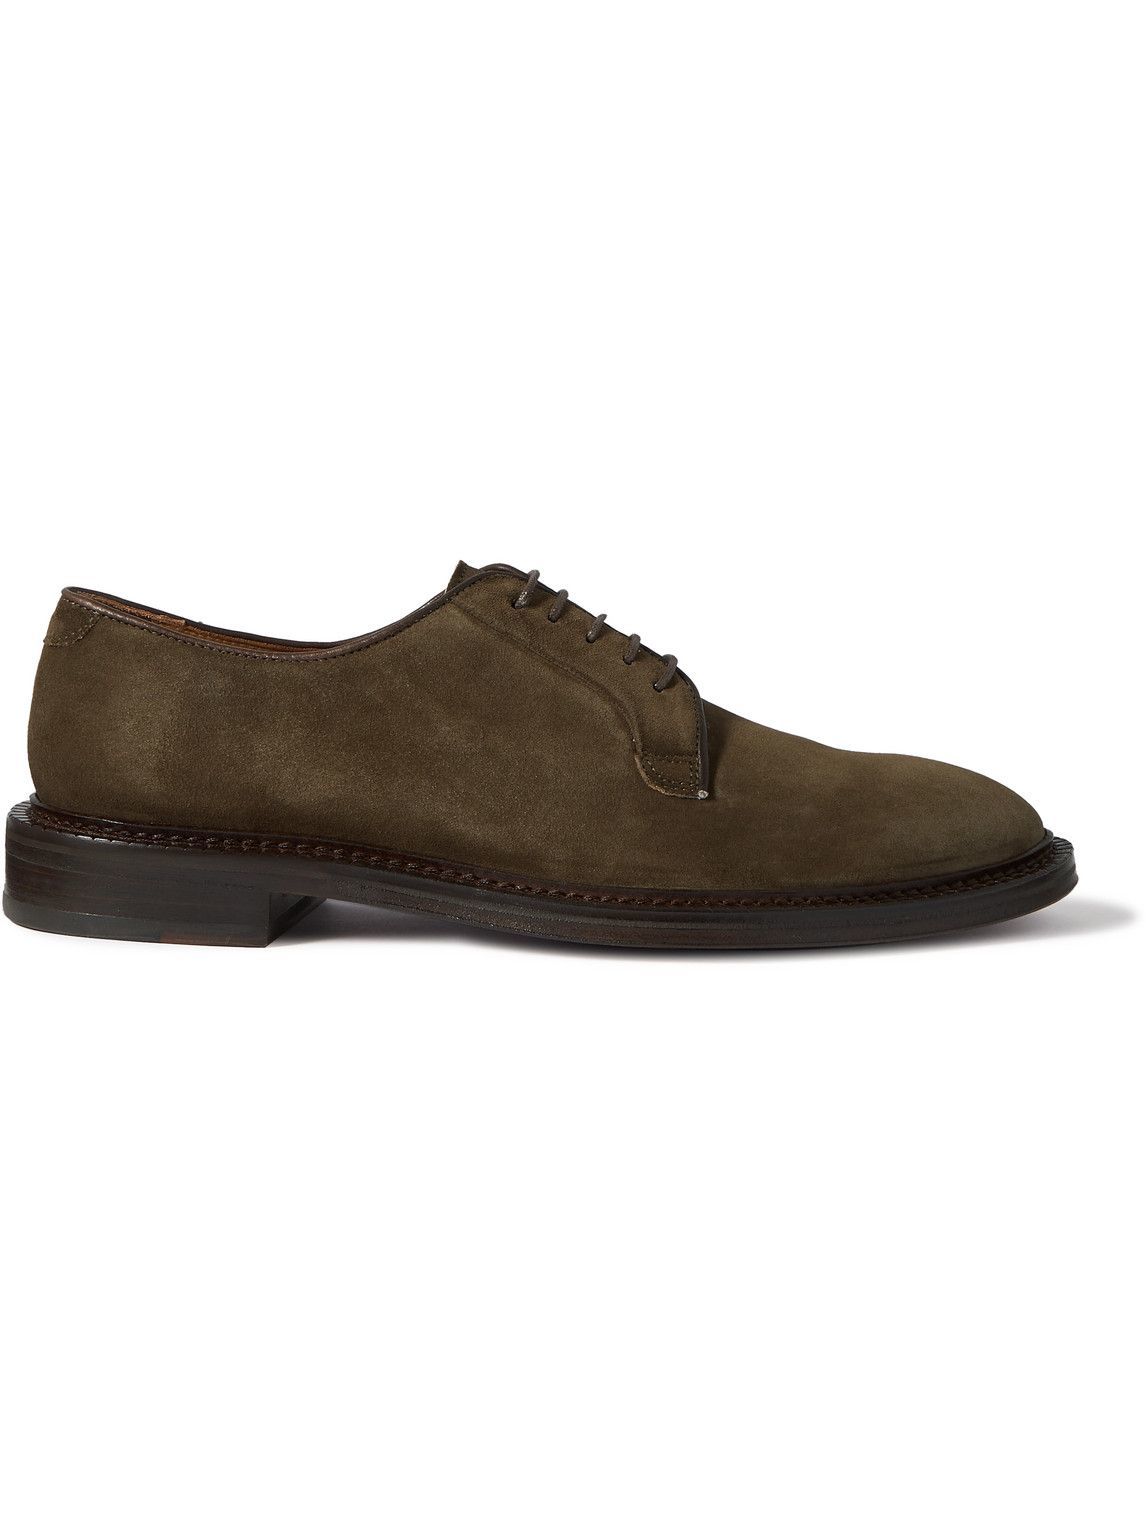 Mr P. - Lucien Regenerated Suede by evolo® Derby Shoes - Green Mr P.